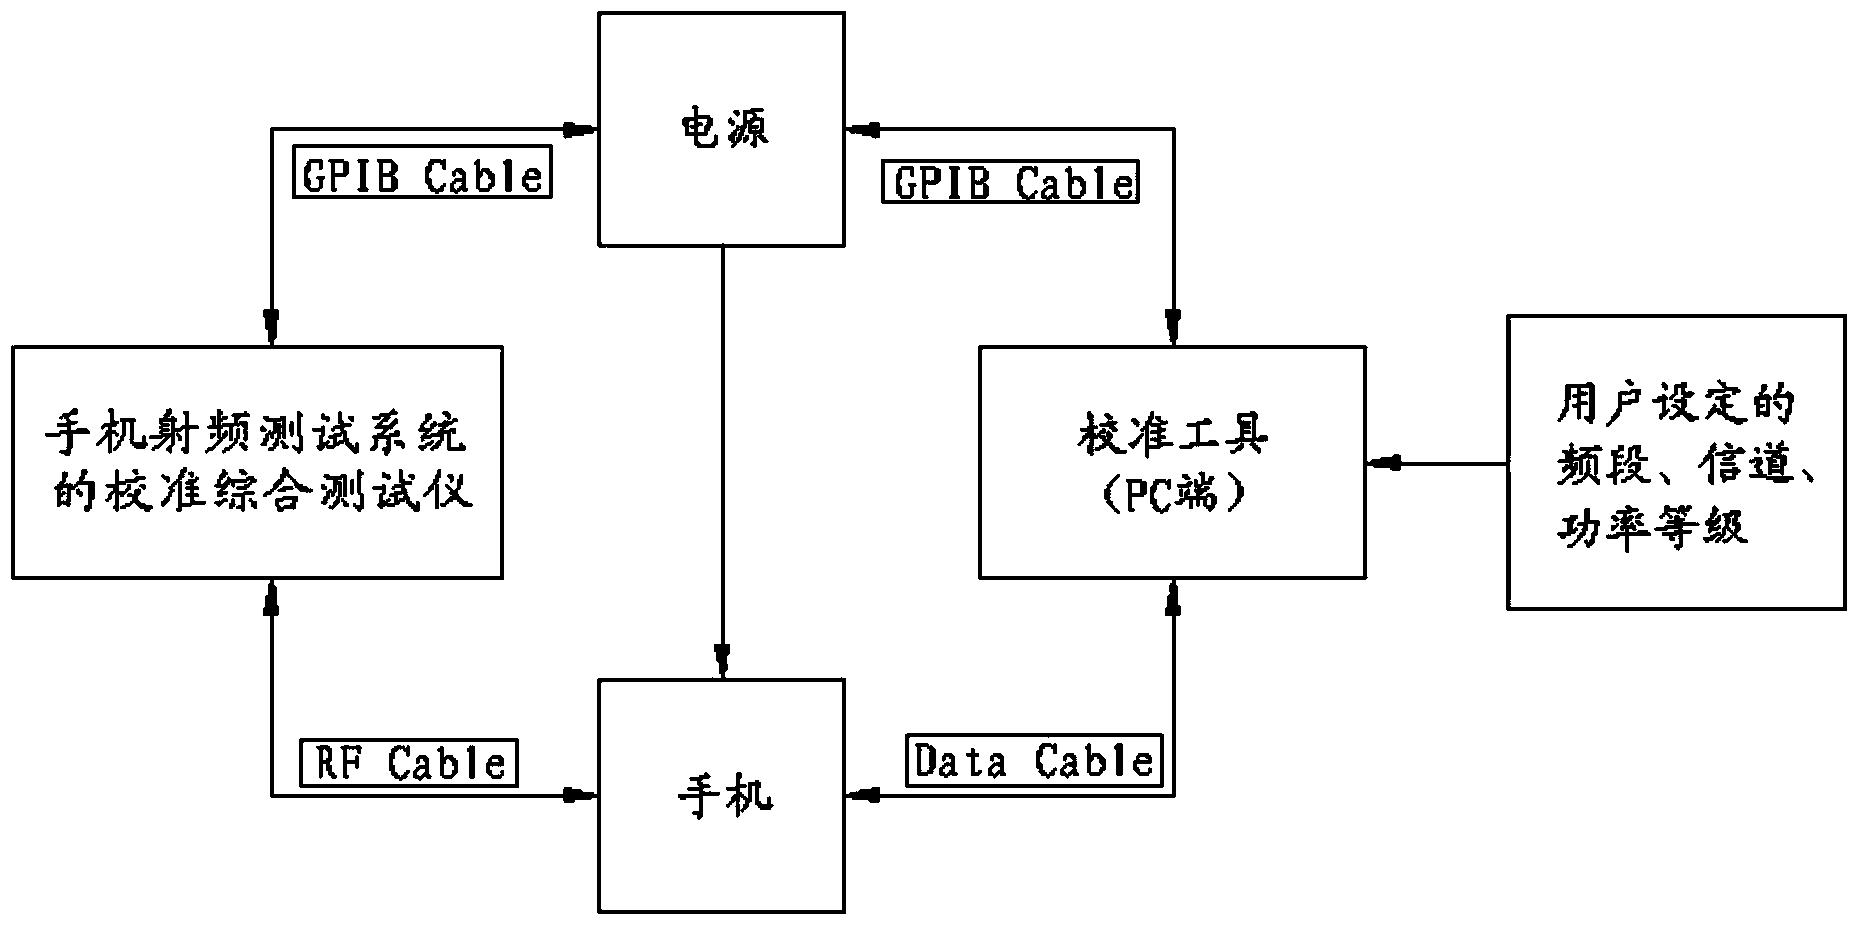 Method and device for automatically calculating compensation for mobile-phone radio frequency testing system